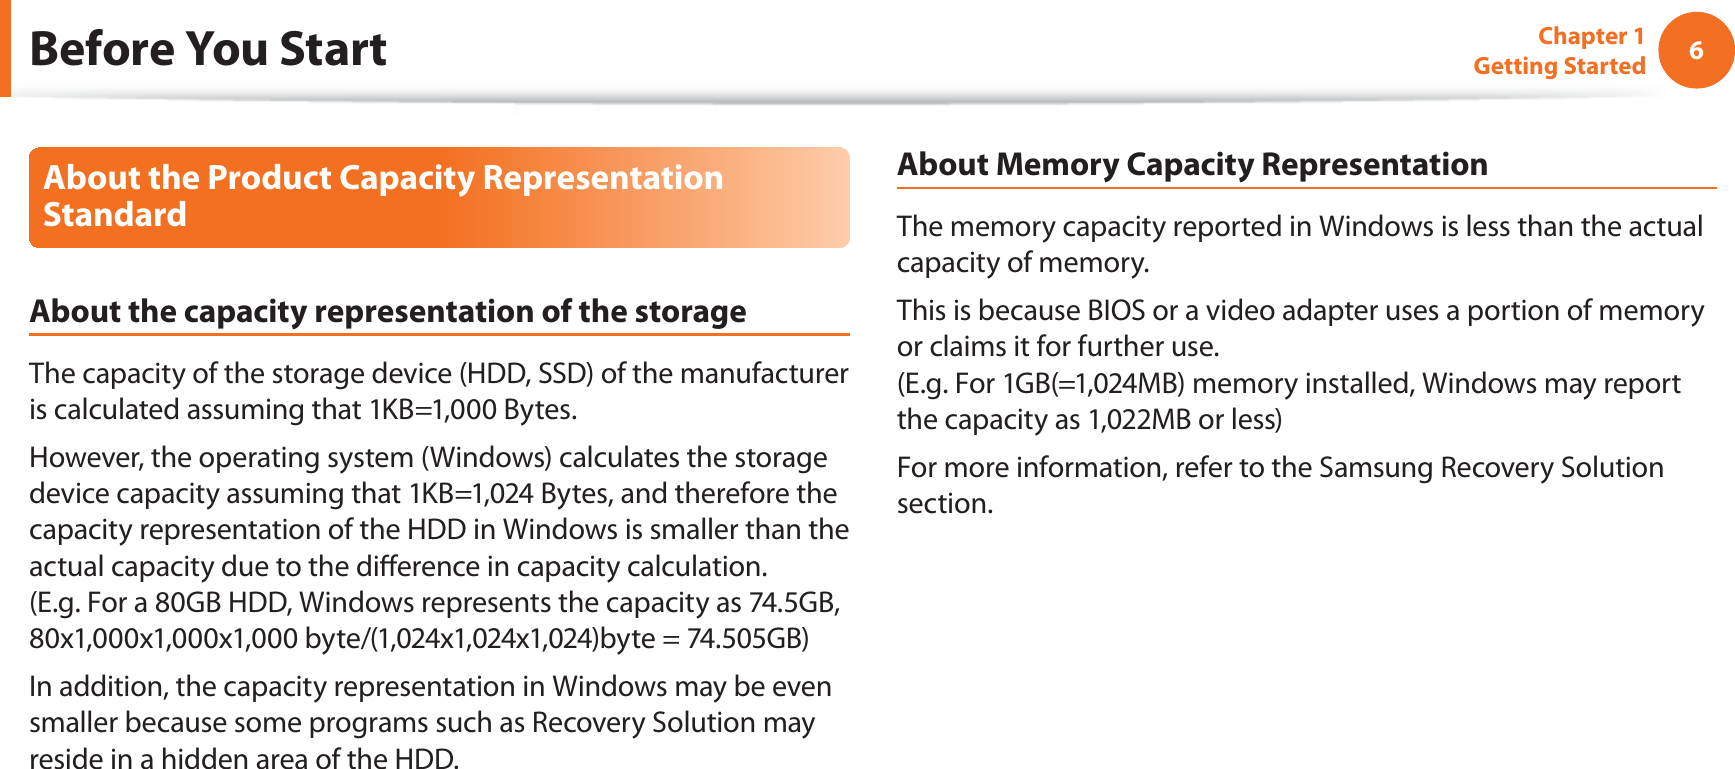 6Chapter 1 Getting StartedAbout the Product Capacity Representation StandardAbout the capacity representation of the storageThe capacity of the storage device (HDD, SSD) of the manufacturer is calculated assuming that 1KB=1,000 Bytes.However, the operating system (Windows) calculates the storage device capacity assuming that 1KB=1,024 Bytes, and therefore the capacity representation of the HDD in Windows is smaller than the actual capacity due to the dierence in capacity calculation.  (E.g. For a 80GB HDD, Windows represents the capacity as 74.5GB, 80x1,000x1,000x1,000 byte/(1,024x1,024x1,024)byte = 74.505GB)In addition, the capacity representation in Windows may be even smaller because some programs such as Recovery Solution may reside in a hidden area of the HDD.About Memory Capacity RepresentationThe memory capacity reported in Windows is less than the actual capacity of memory.This is because BIOS or a video adapter uses a portion of memory or claims it for further use. (E.g. For 1GB(=1,024MB) memory installed, Windows may report the capacity as 1,022MB or less)For more information, refer to the Samsung Recovery Solution section.Before You Start